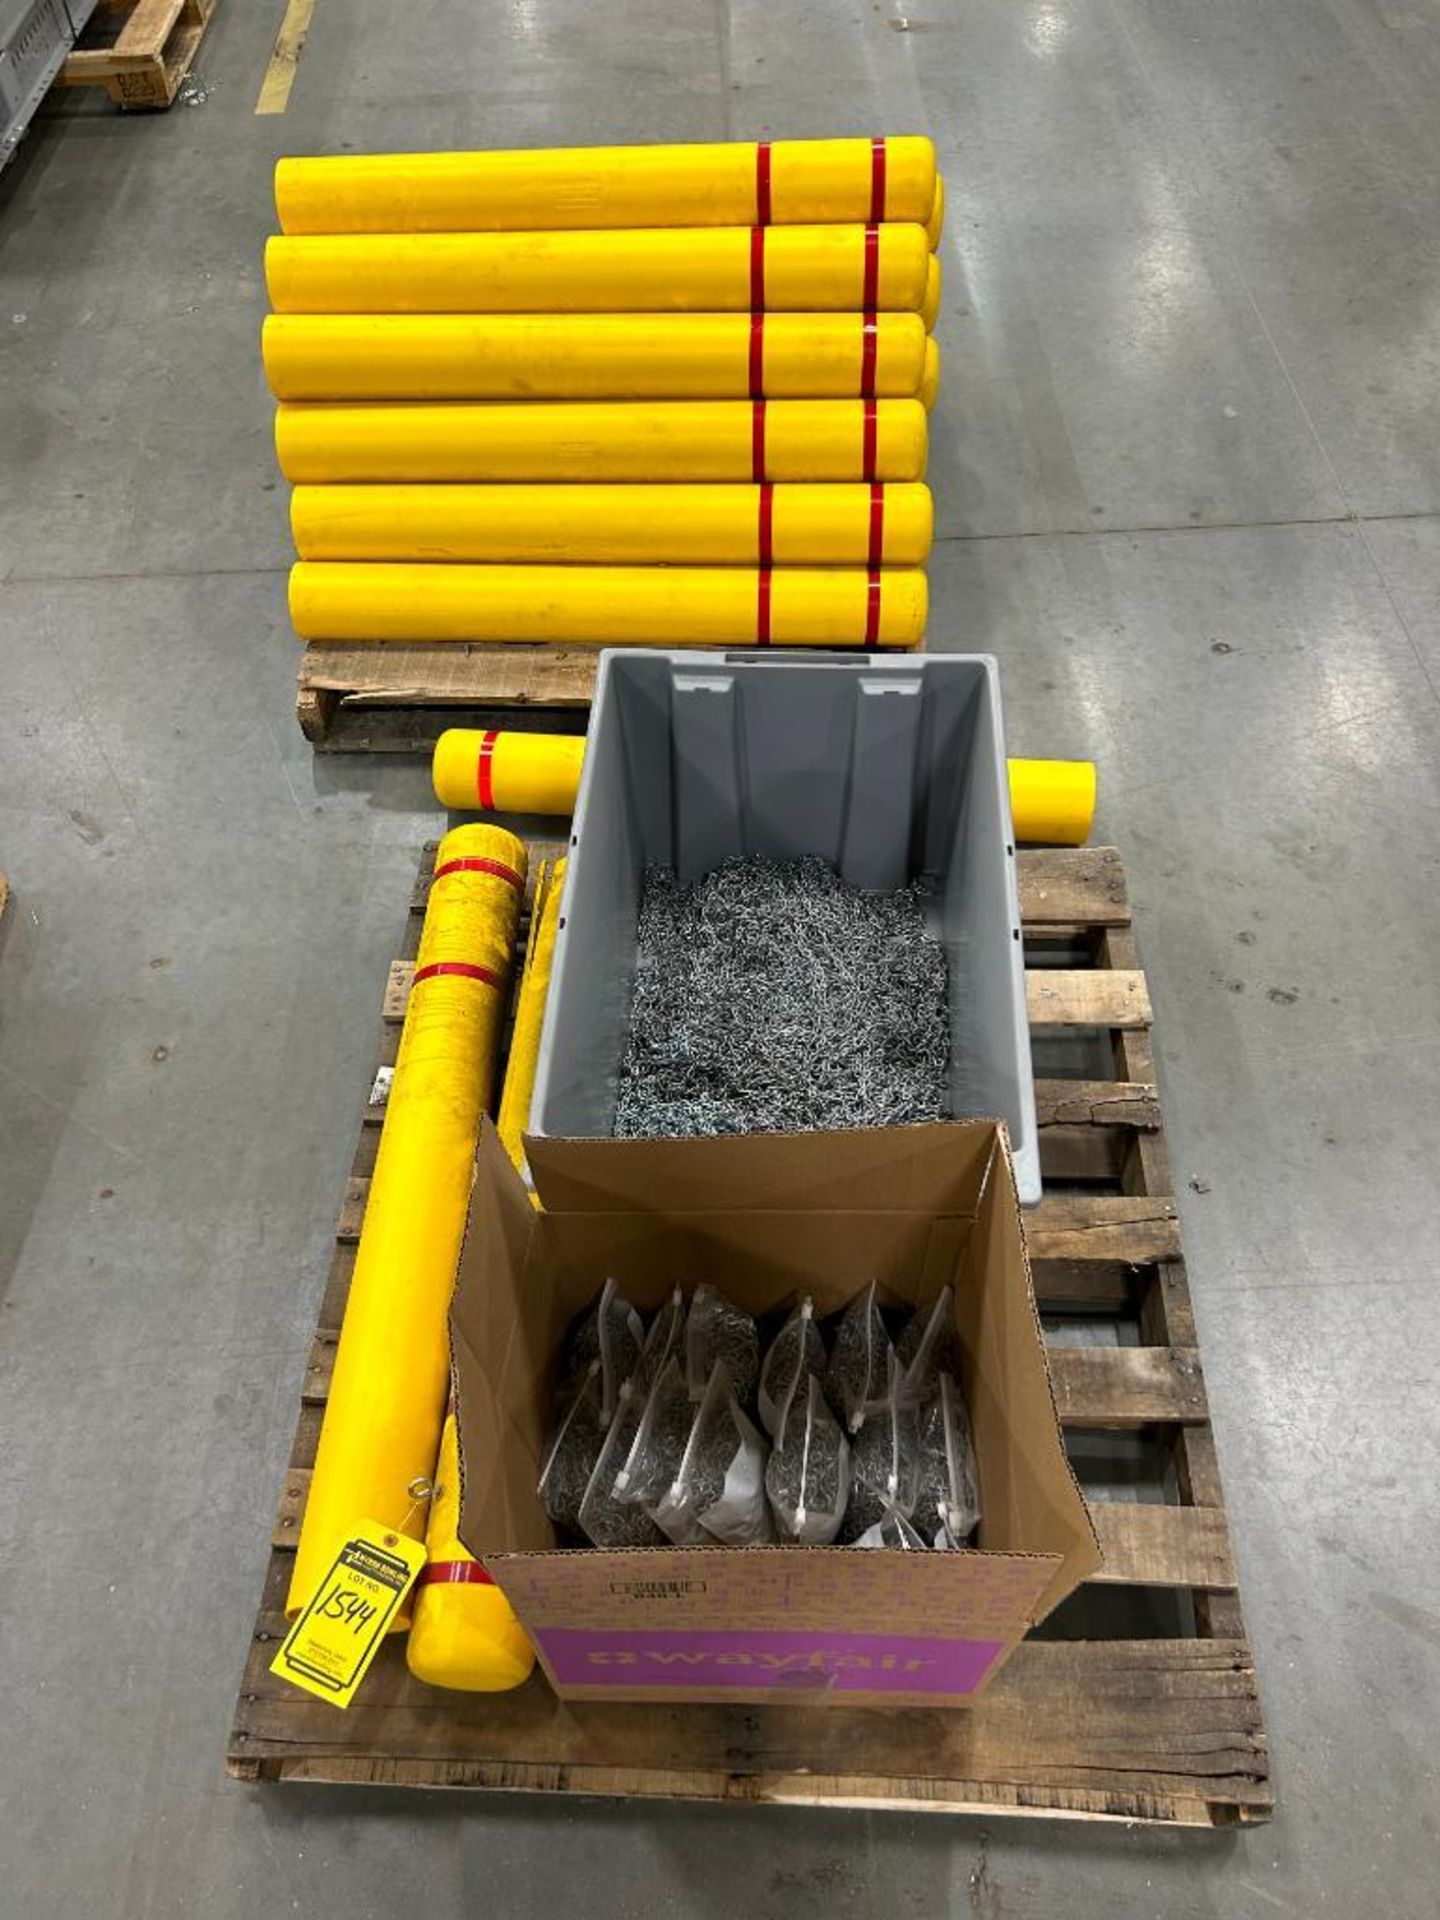 (20) Yellow Post Guards, Chains, & Skid w/ Protective Netting ($25 Loading Fee Will Be Added To Invo